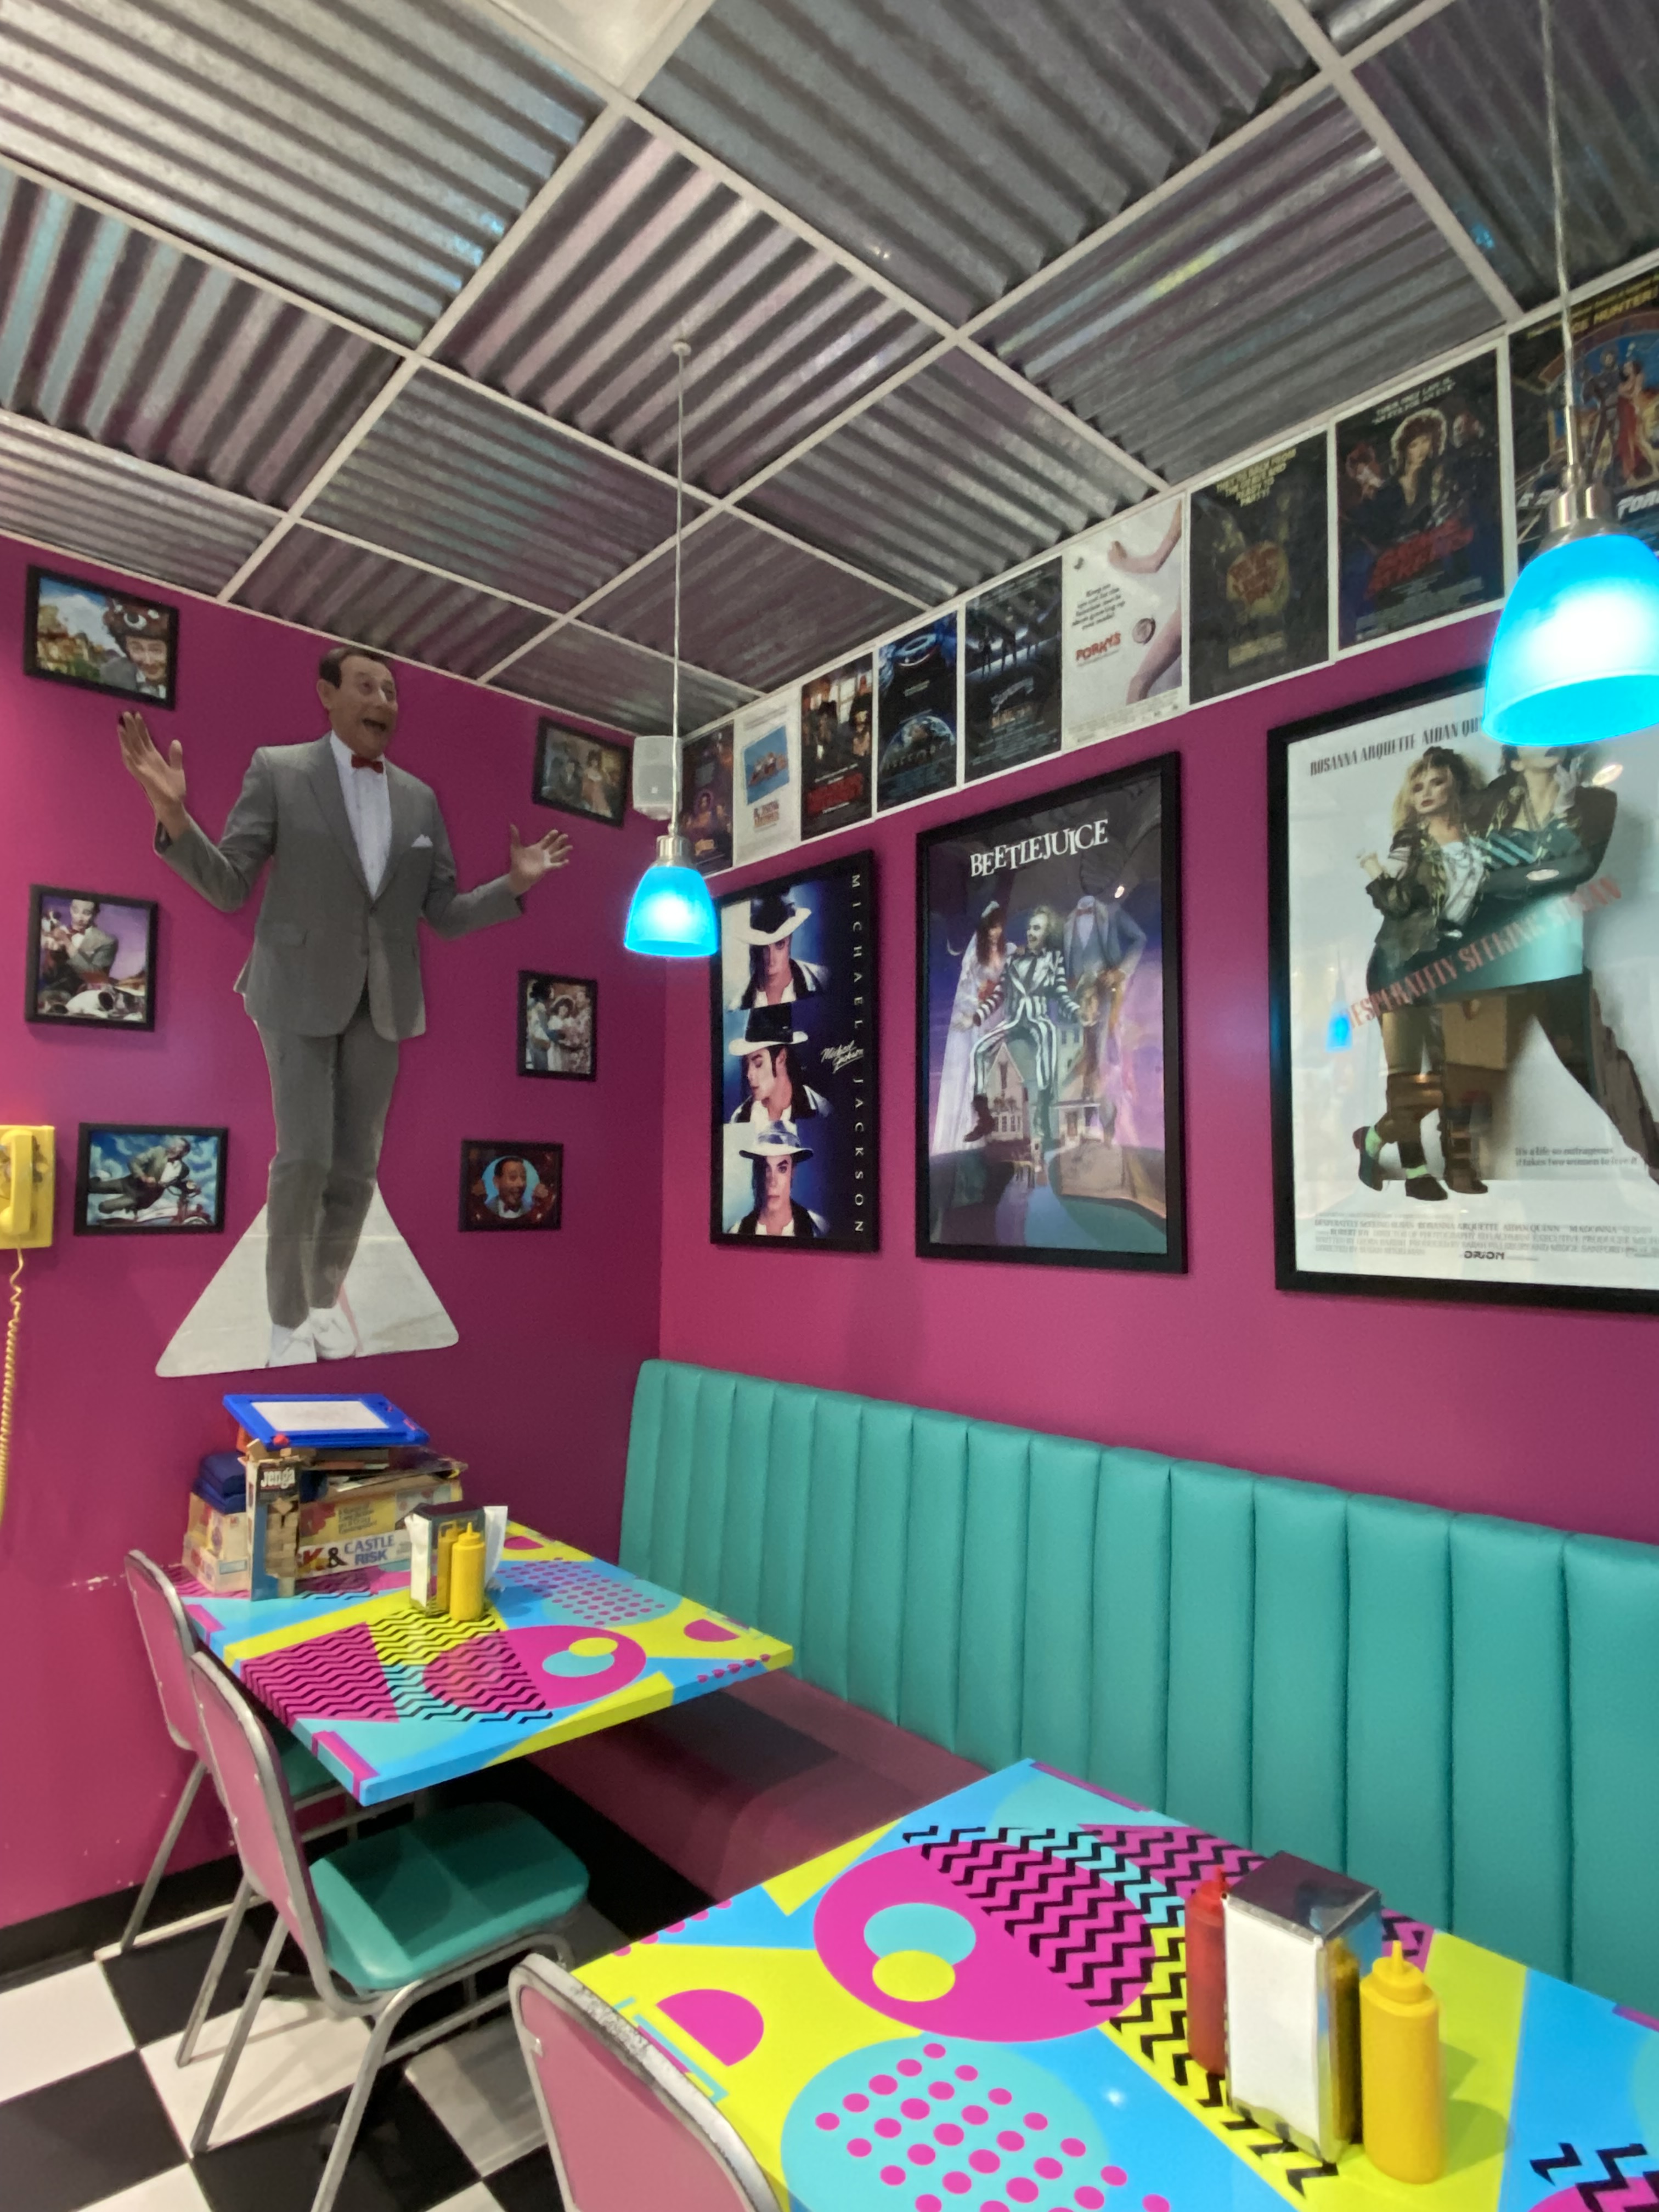 80s cafe dining area with eighties memorabilia - Pee Wee Herman, Beetlejuice, Michael Jackson and other retro decor 